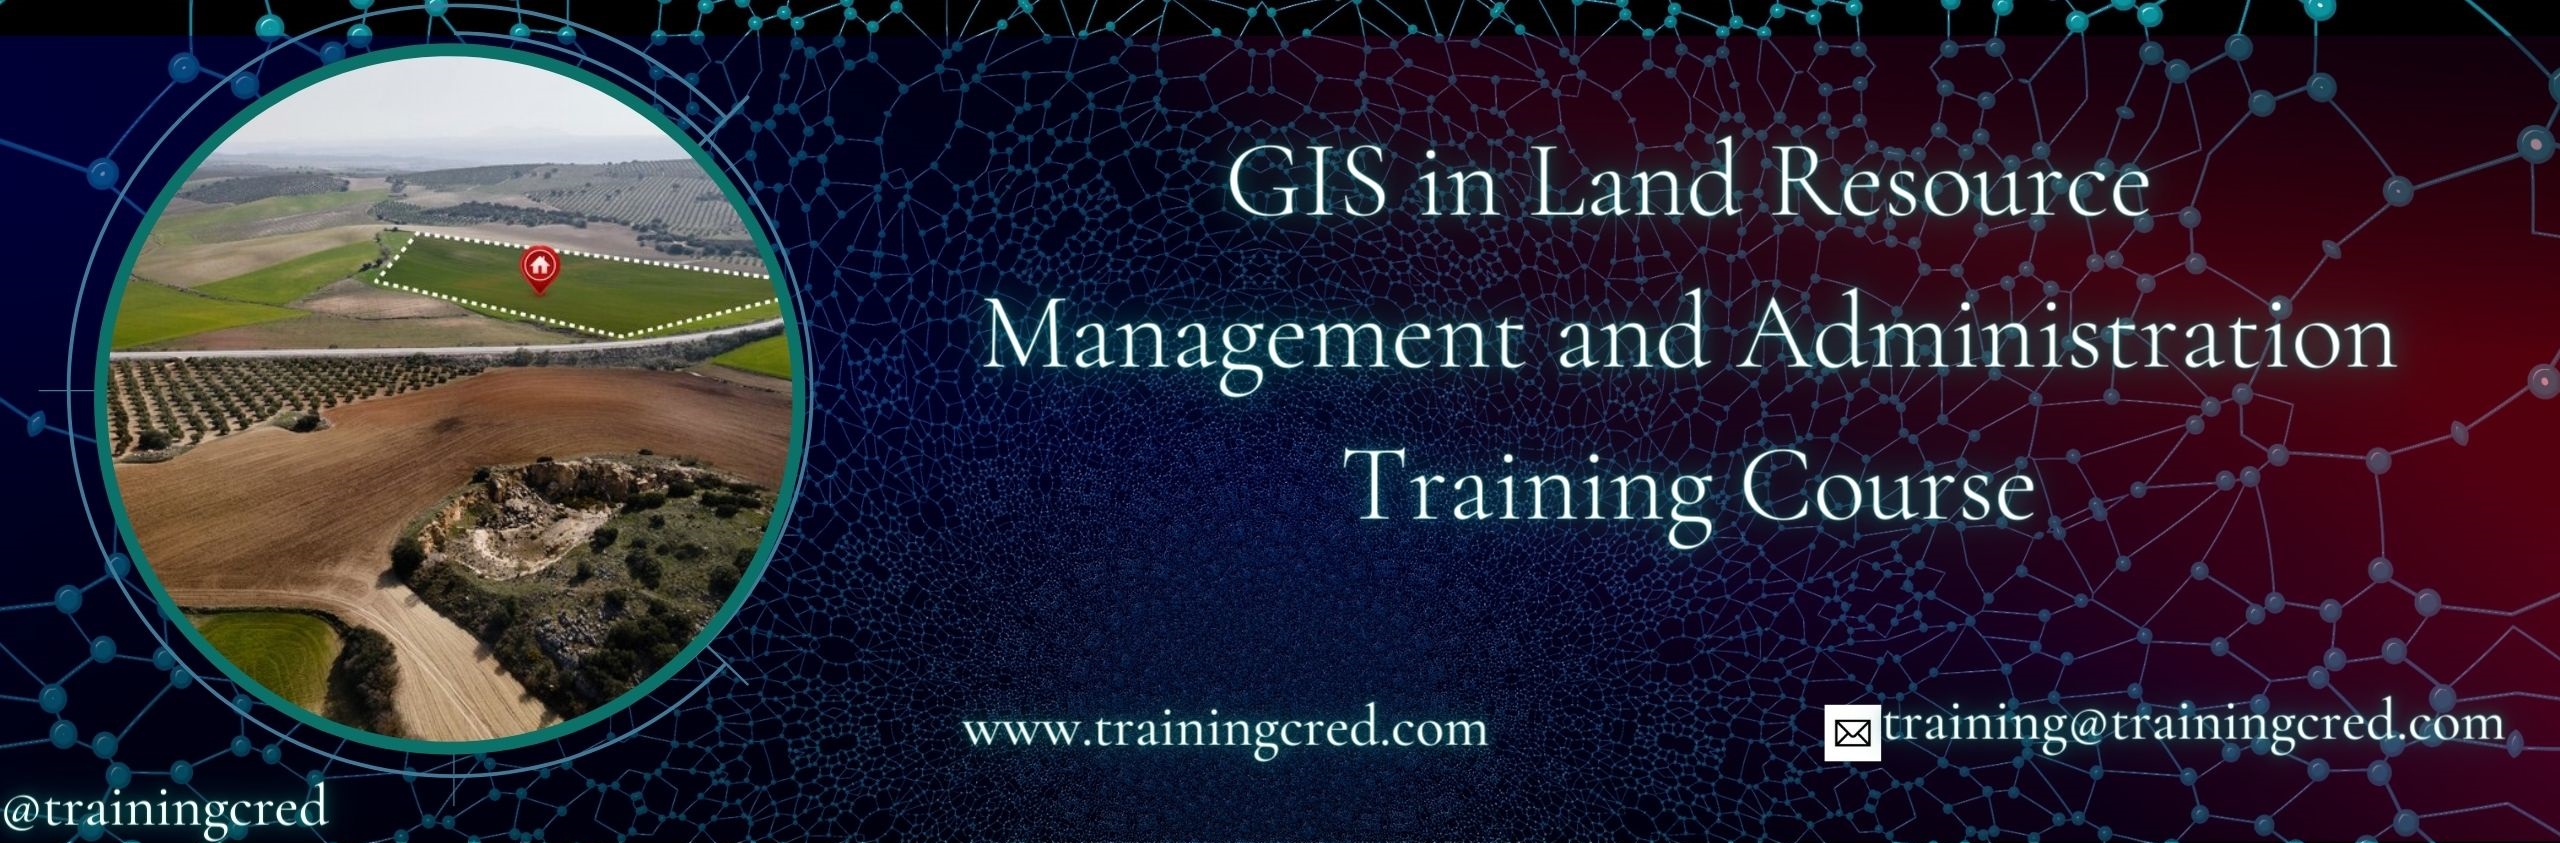 GIS in Land Resource Management and Administration Training